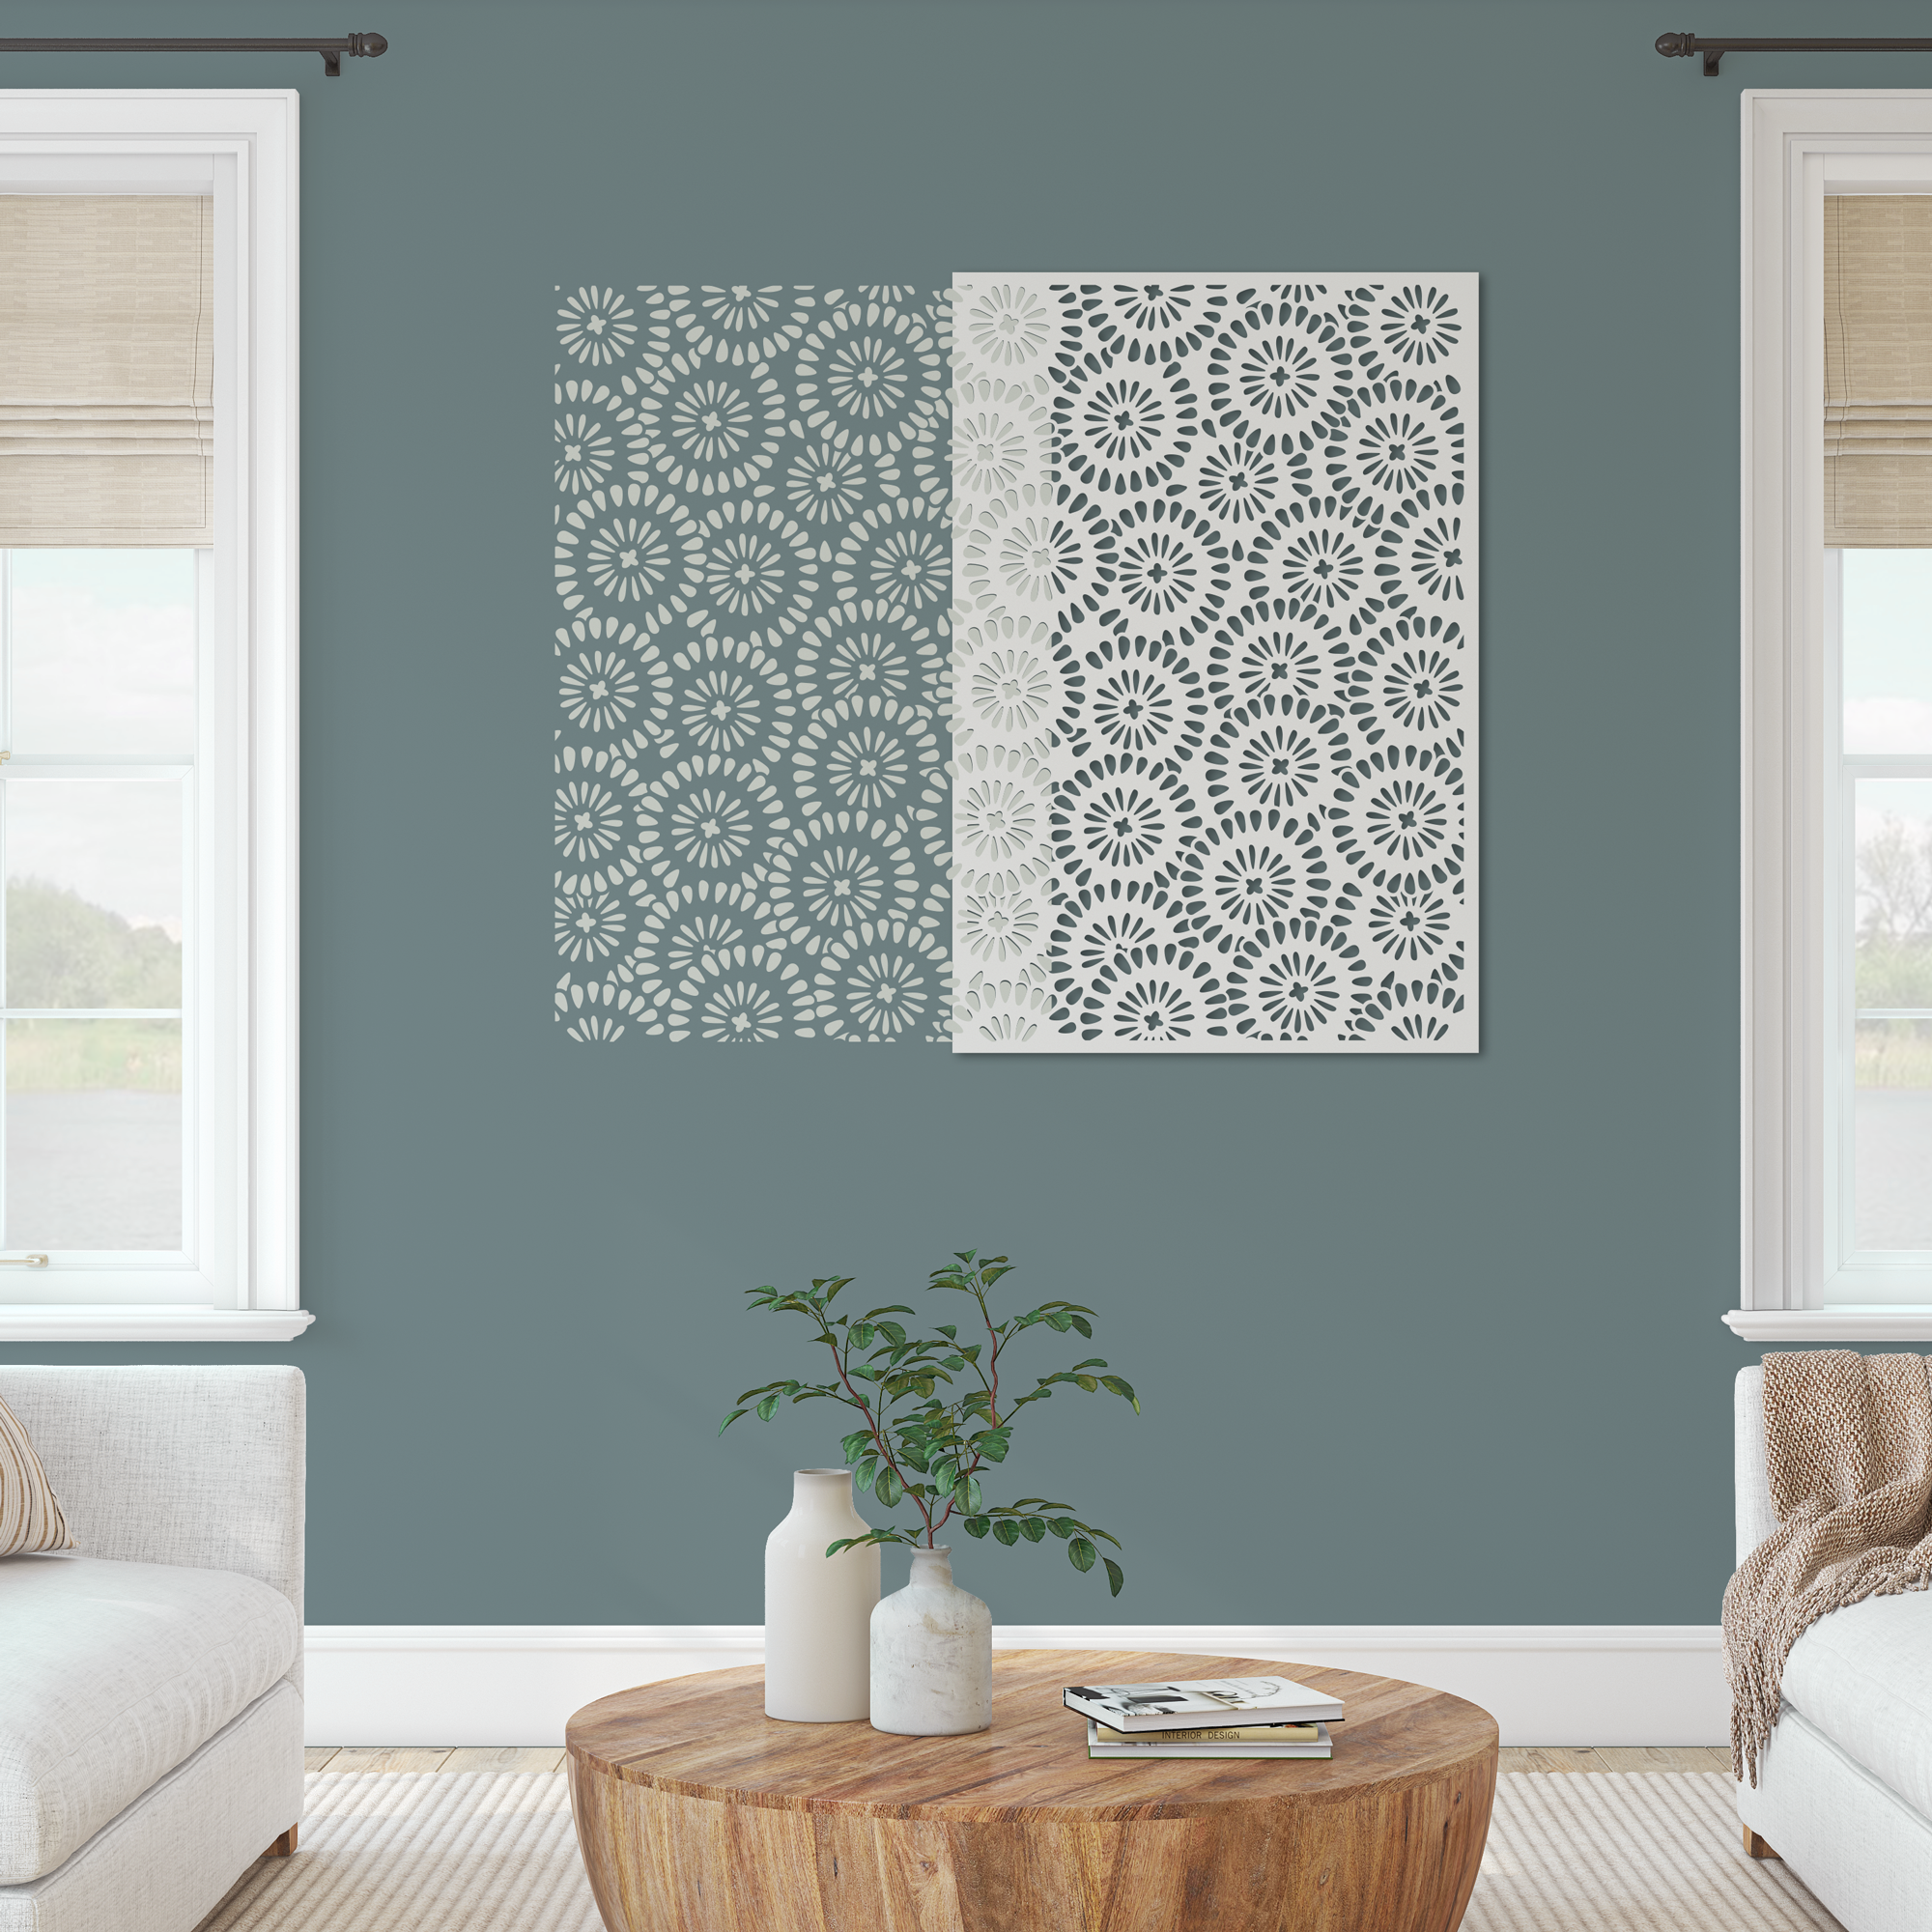 How to stencil a repeat pattern